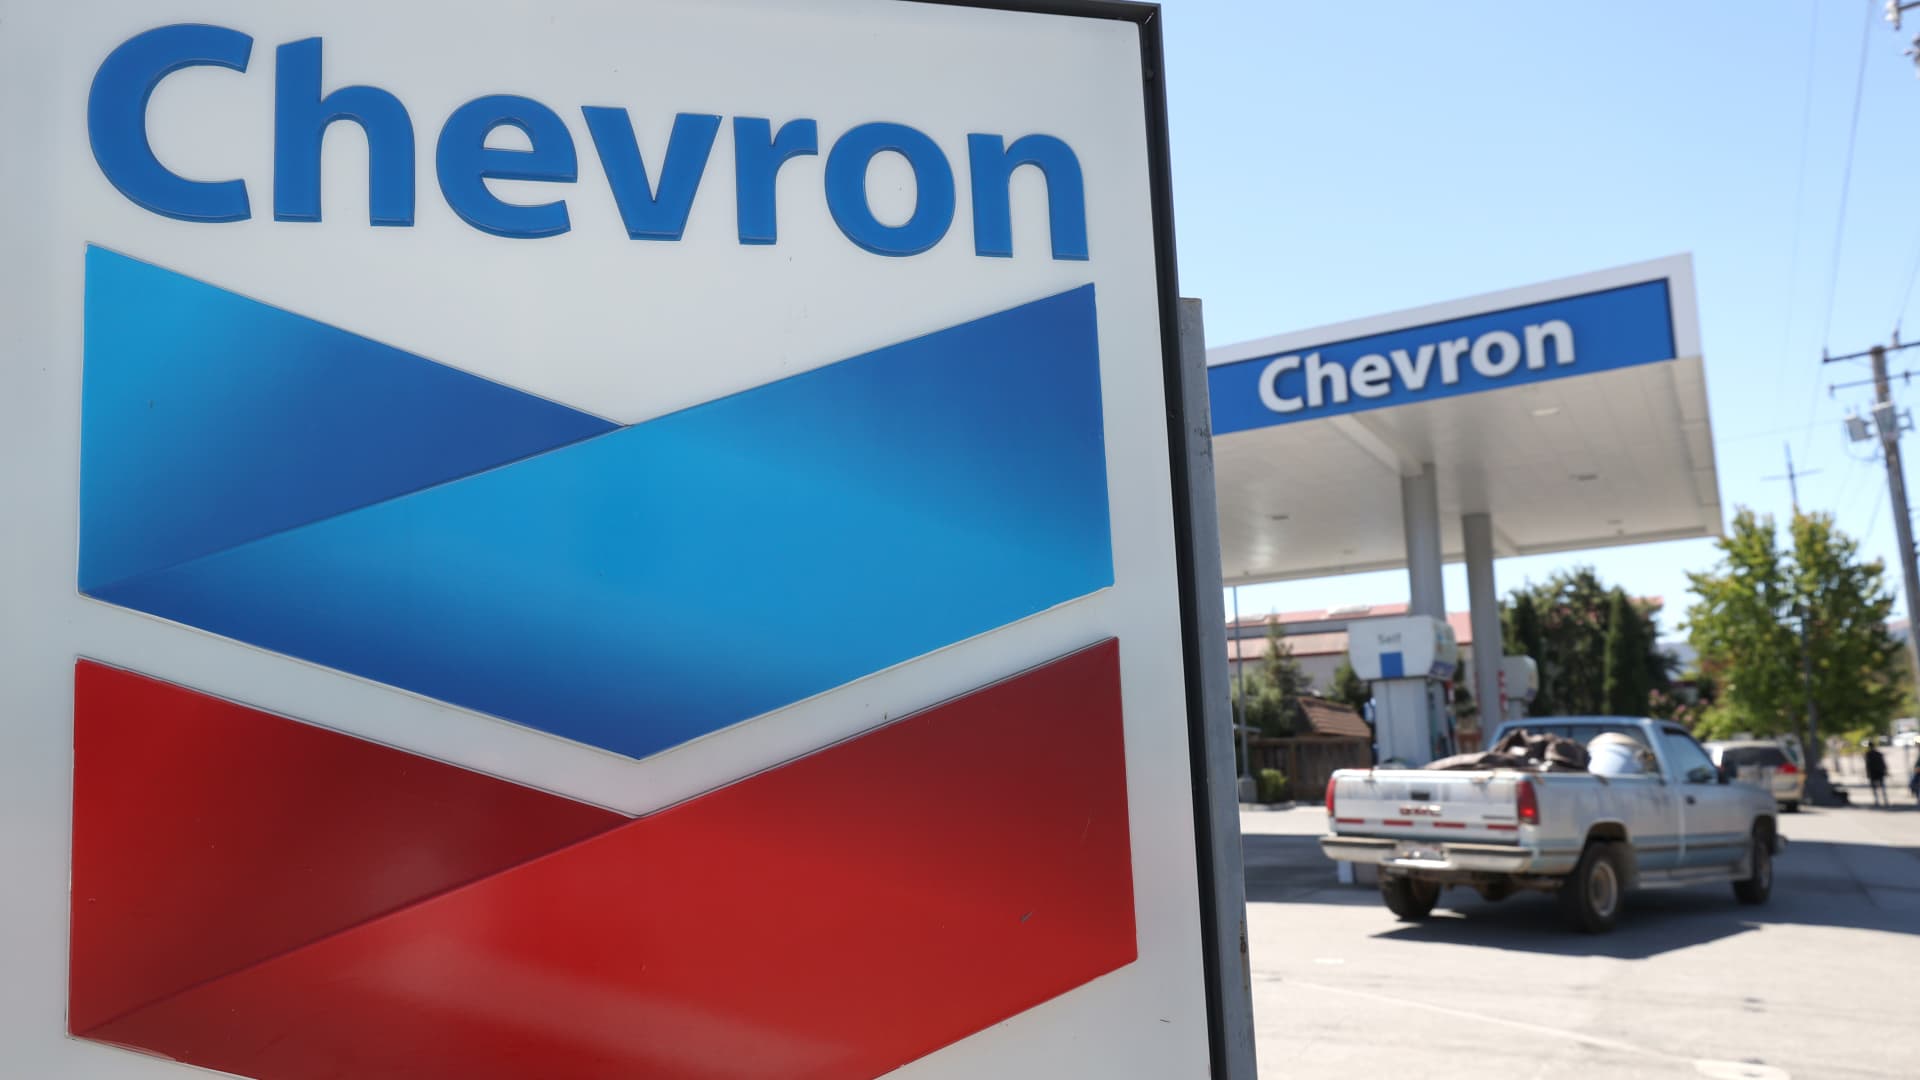 A sign is posted in front of a Chevron gas station on July 31, 2020 in Novato, California.